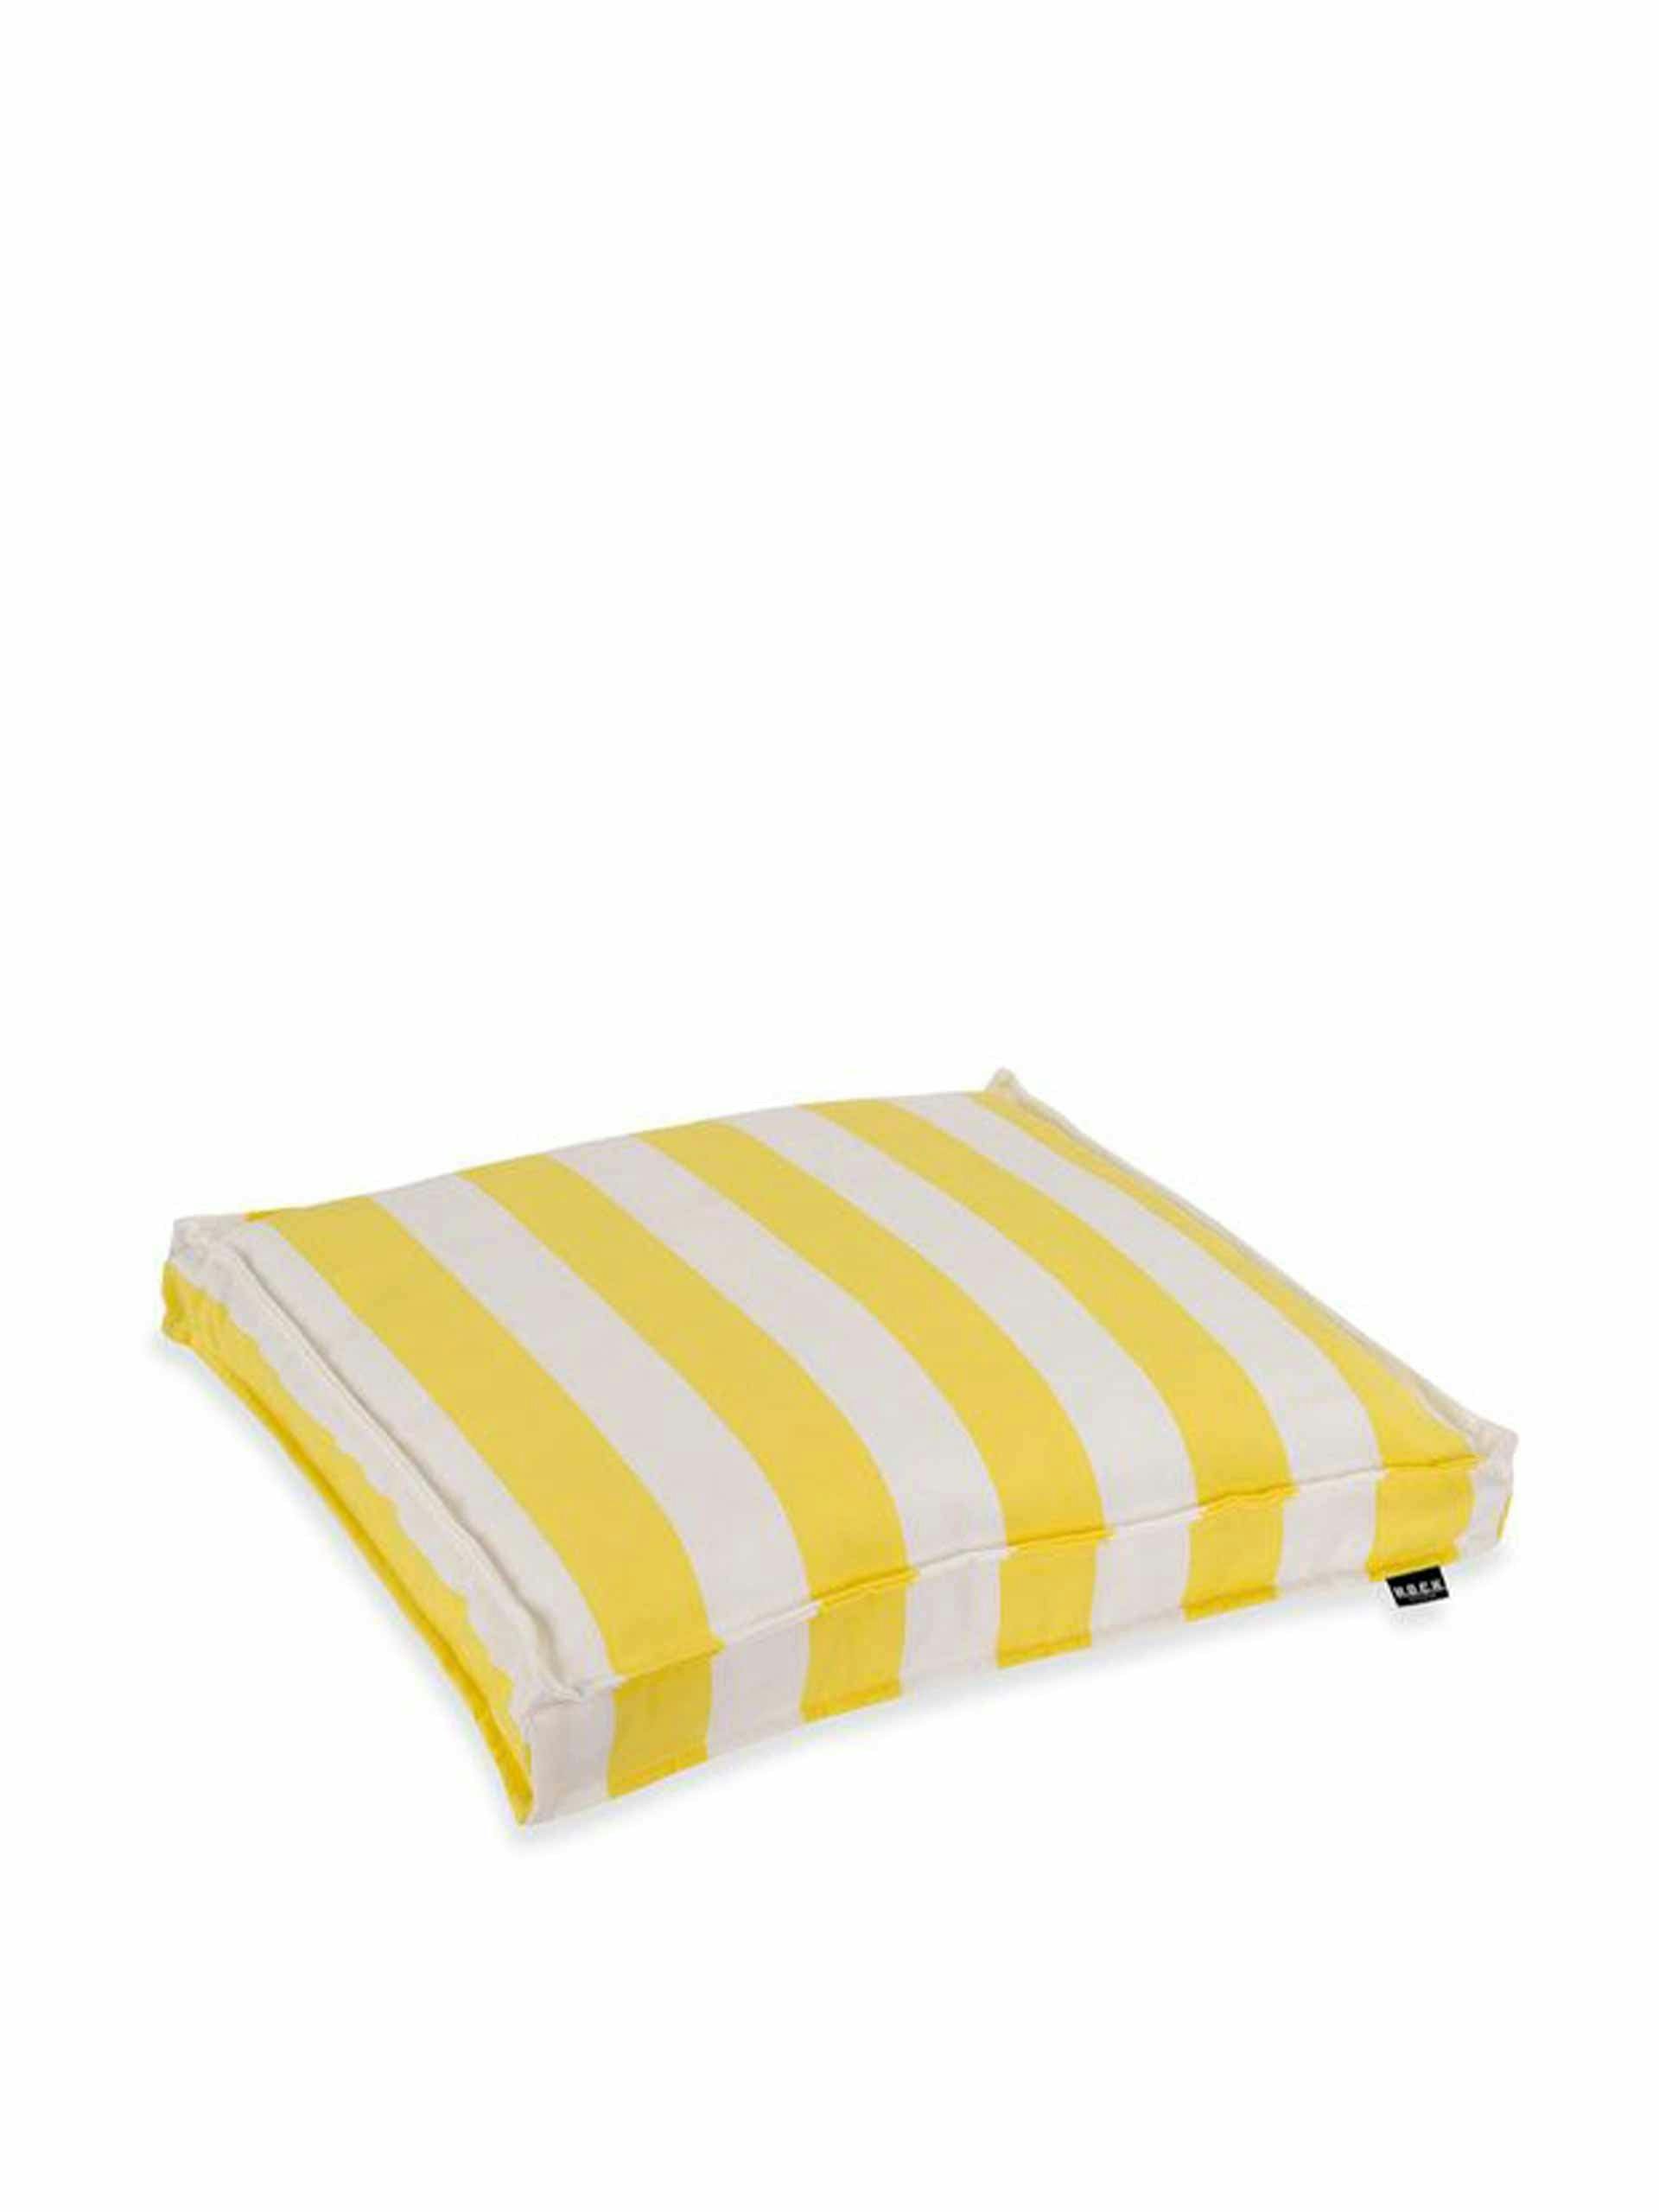 Outdoor yellow striped seat cushion